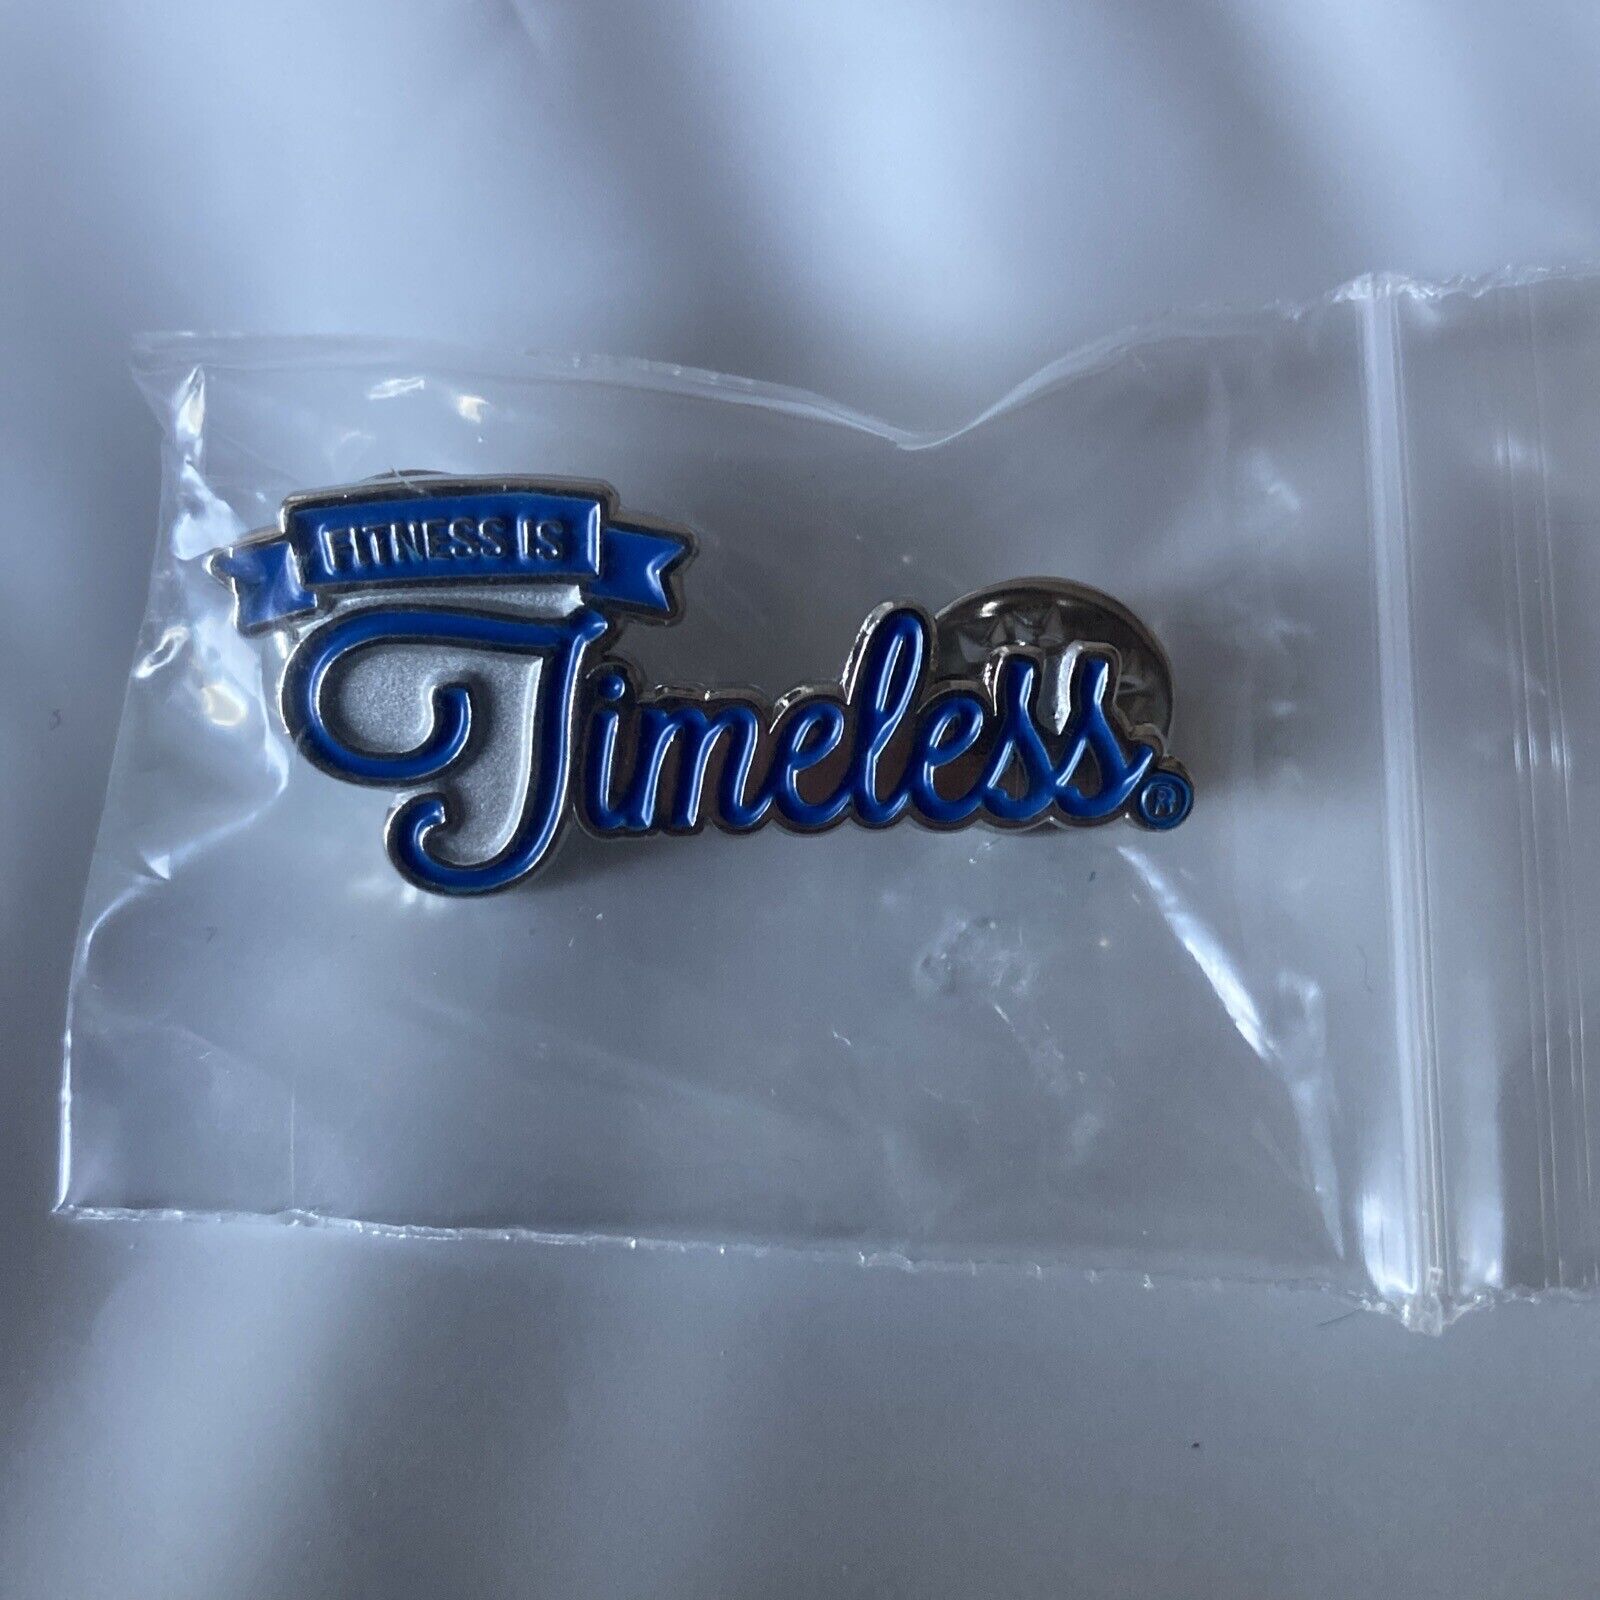 Fitness Is Timeless Lapel Pin Silver with Blue Lettering